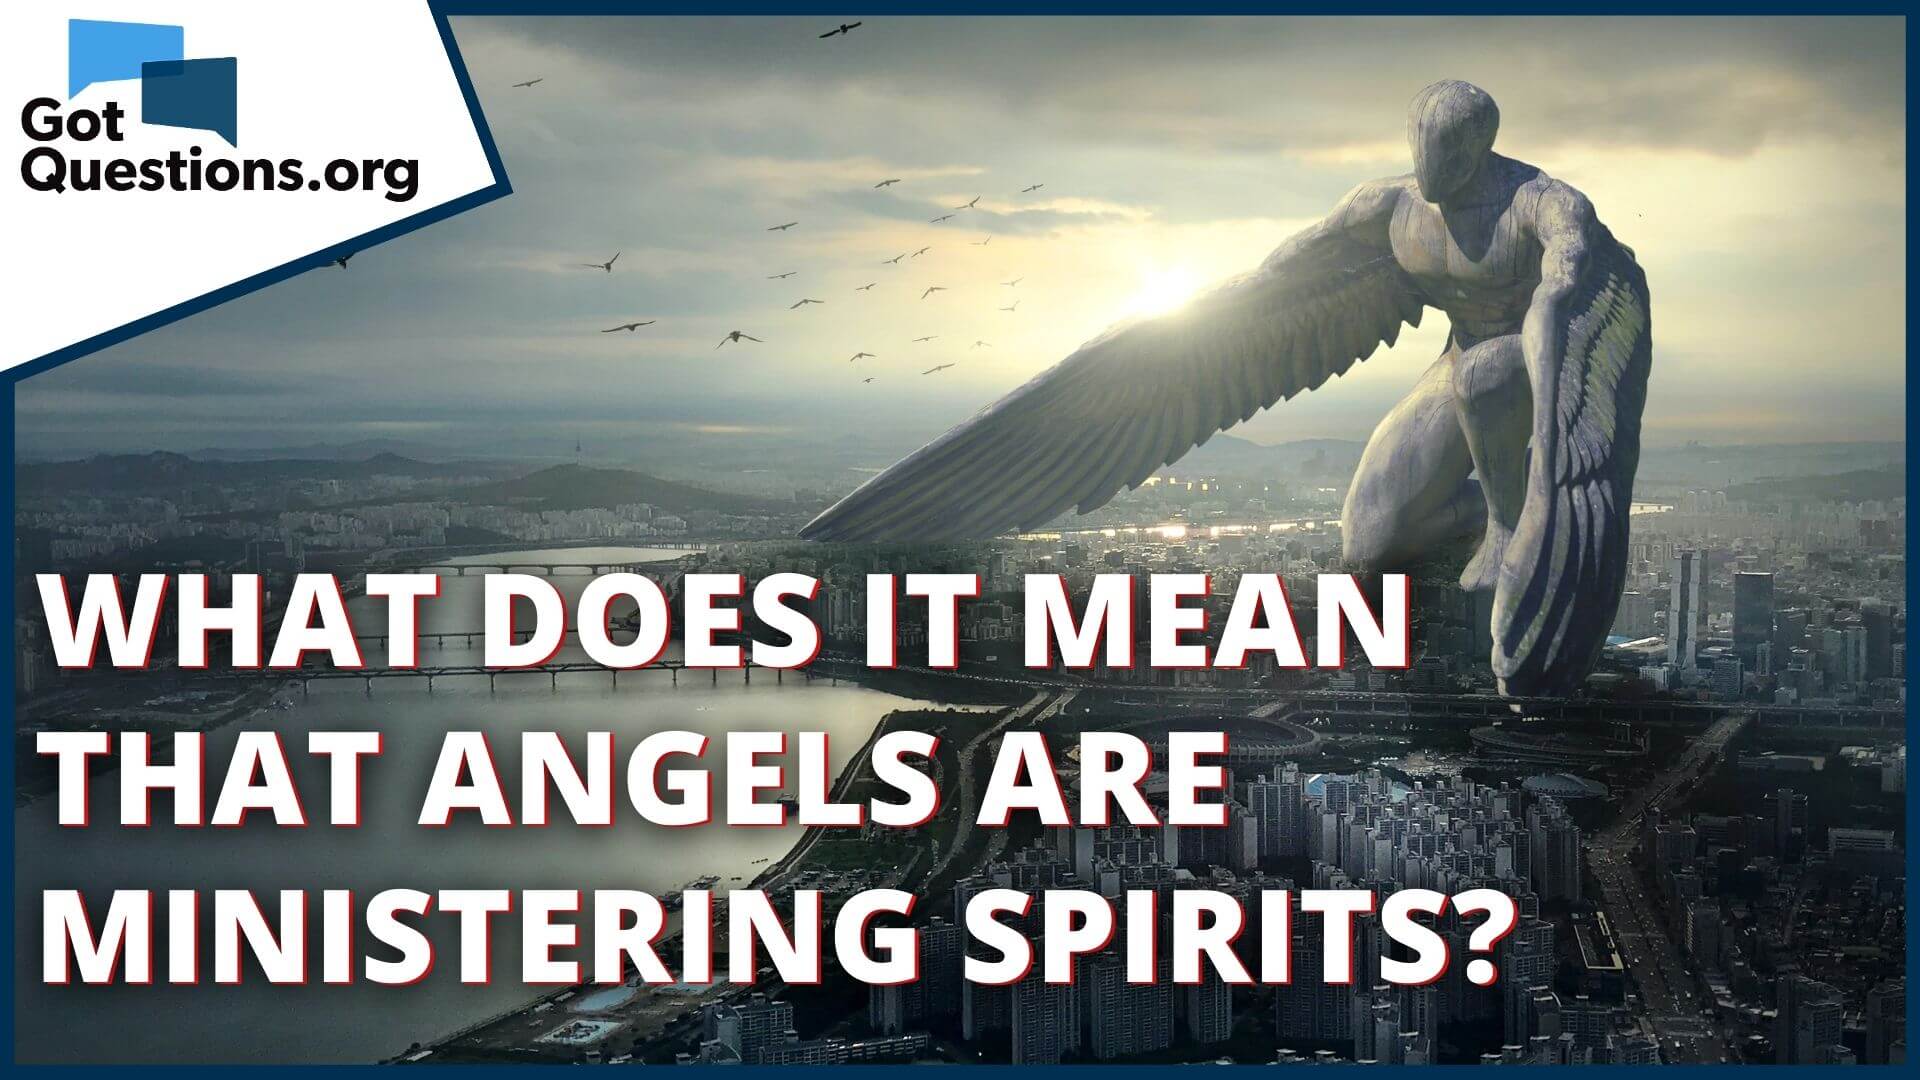 What Does It Mean That Angels Are Ministering Spirits (Hebrews 1:14)? |  Gotquestions.org